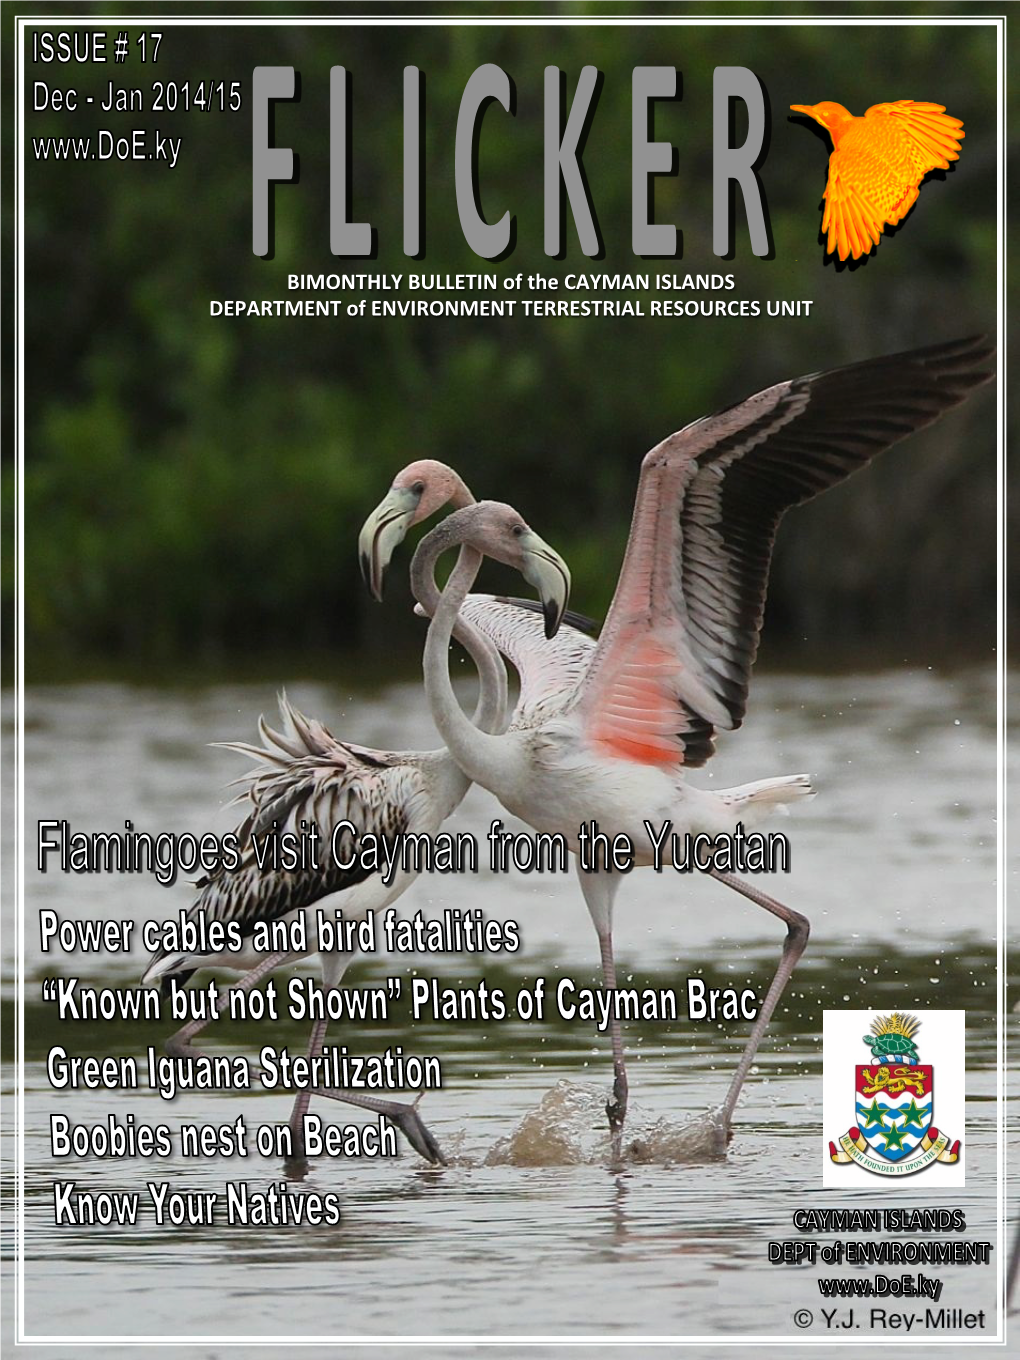 BIMONTHLY BULLETIN of the CAYMAN ISLANDS DEPARTMENT of ENVIRONMENT TERRESTRIAL RESOURCES UNIT Flamingoes Visit Cayman from the Yucatan